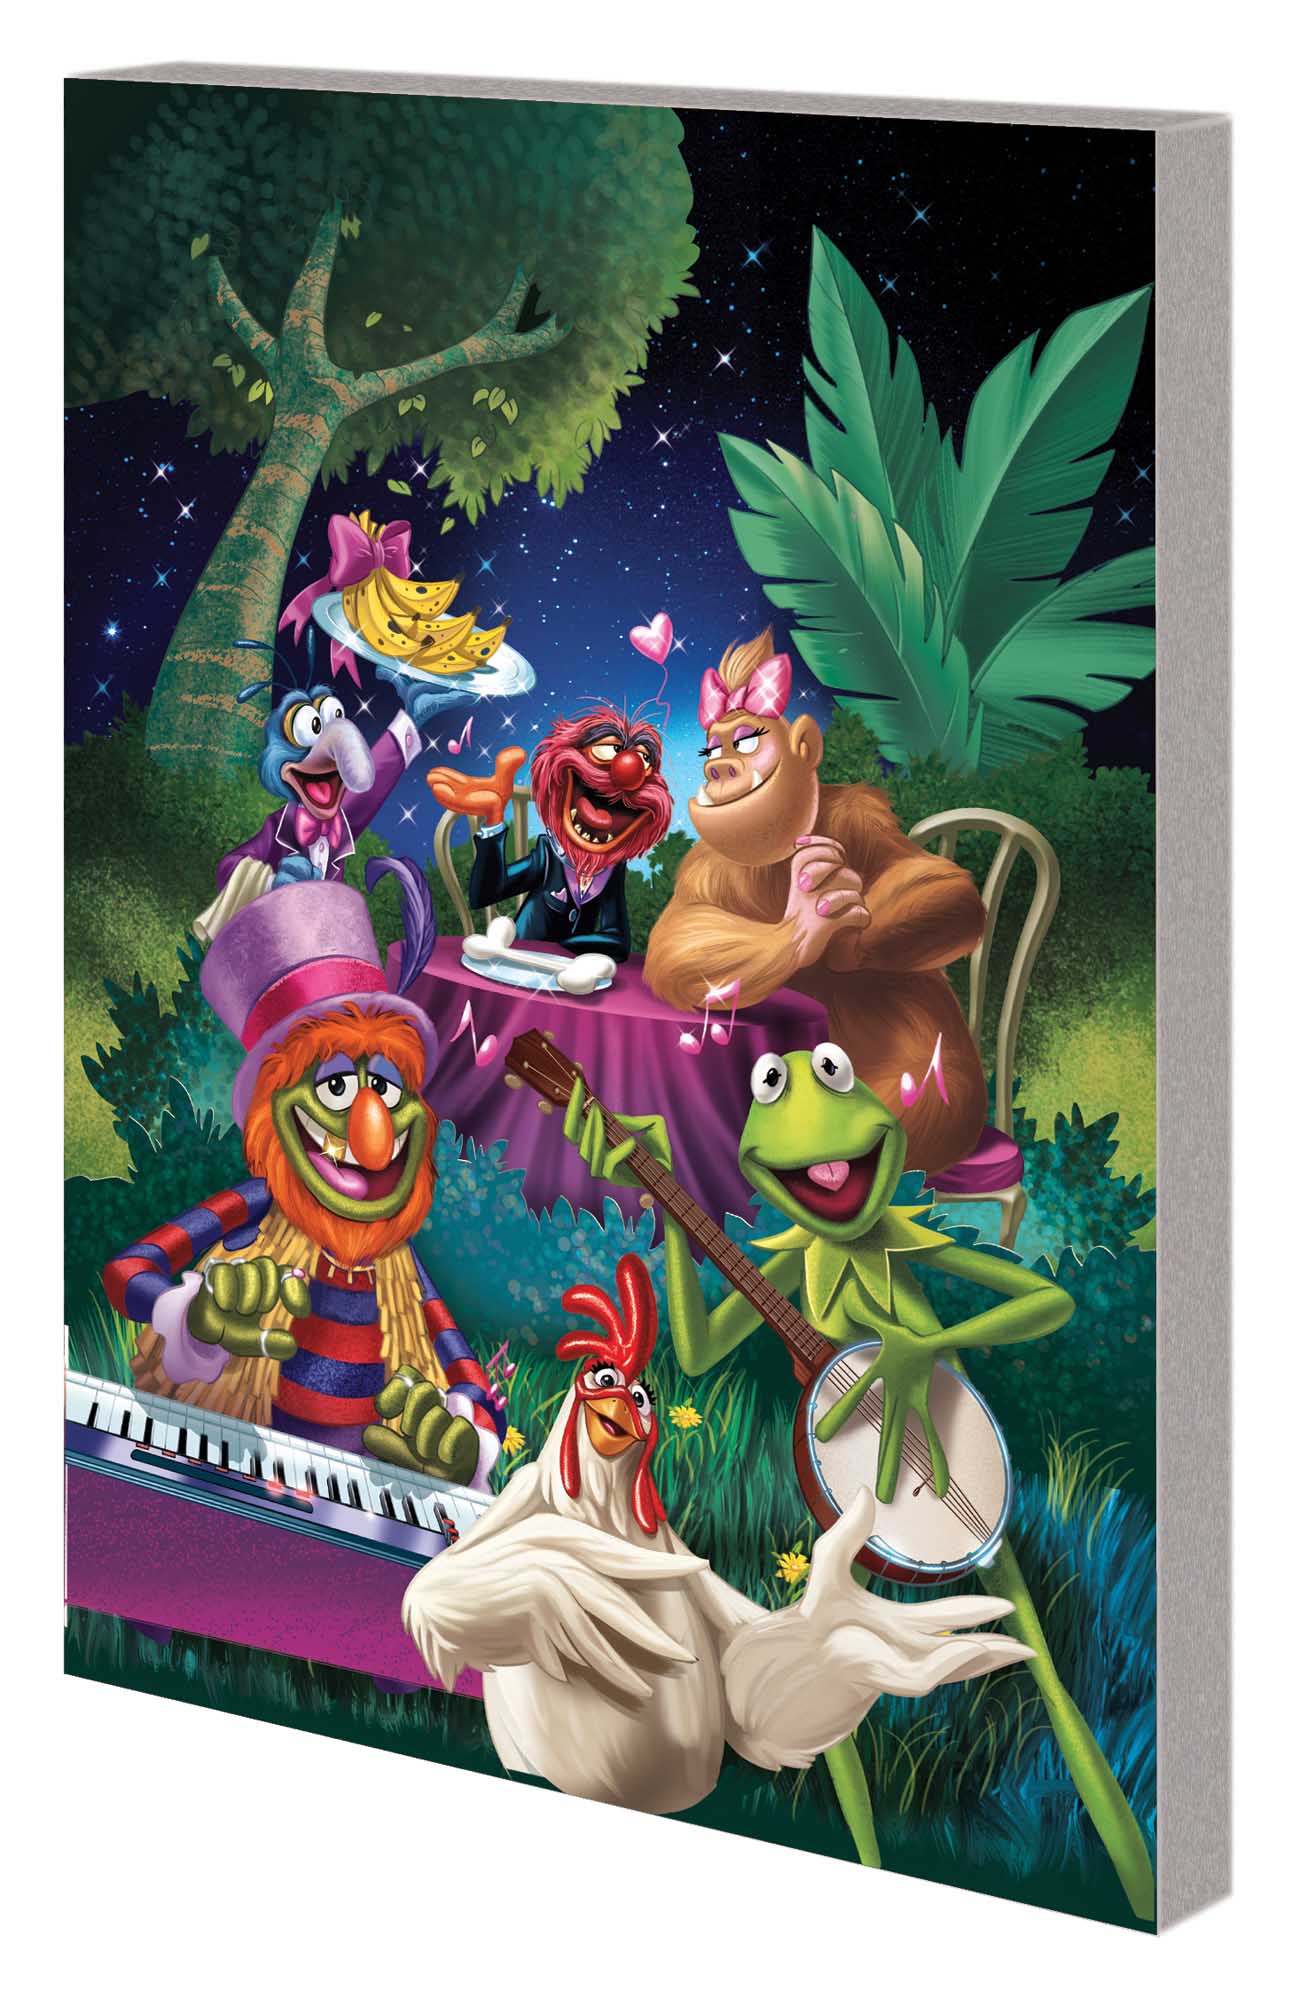 MUPPETS: THE FOUR SEASONS TPB (Trade Paperback)